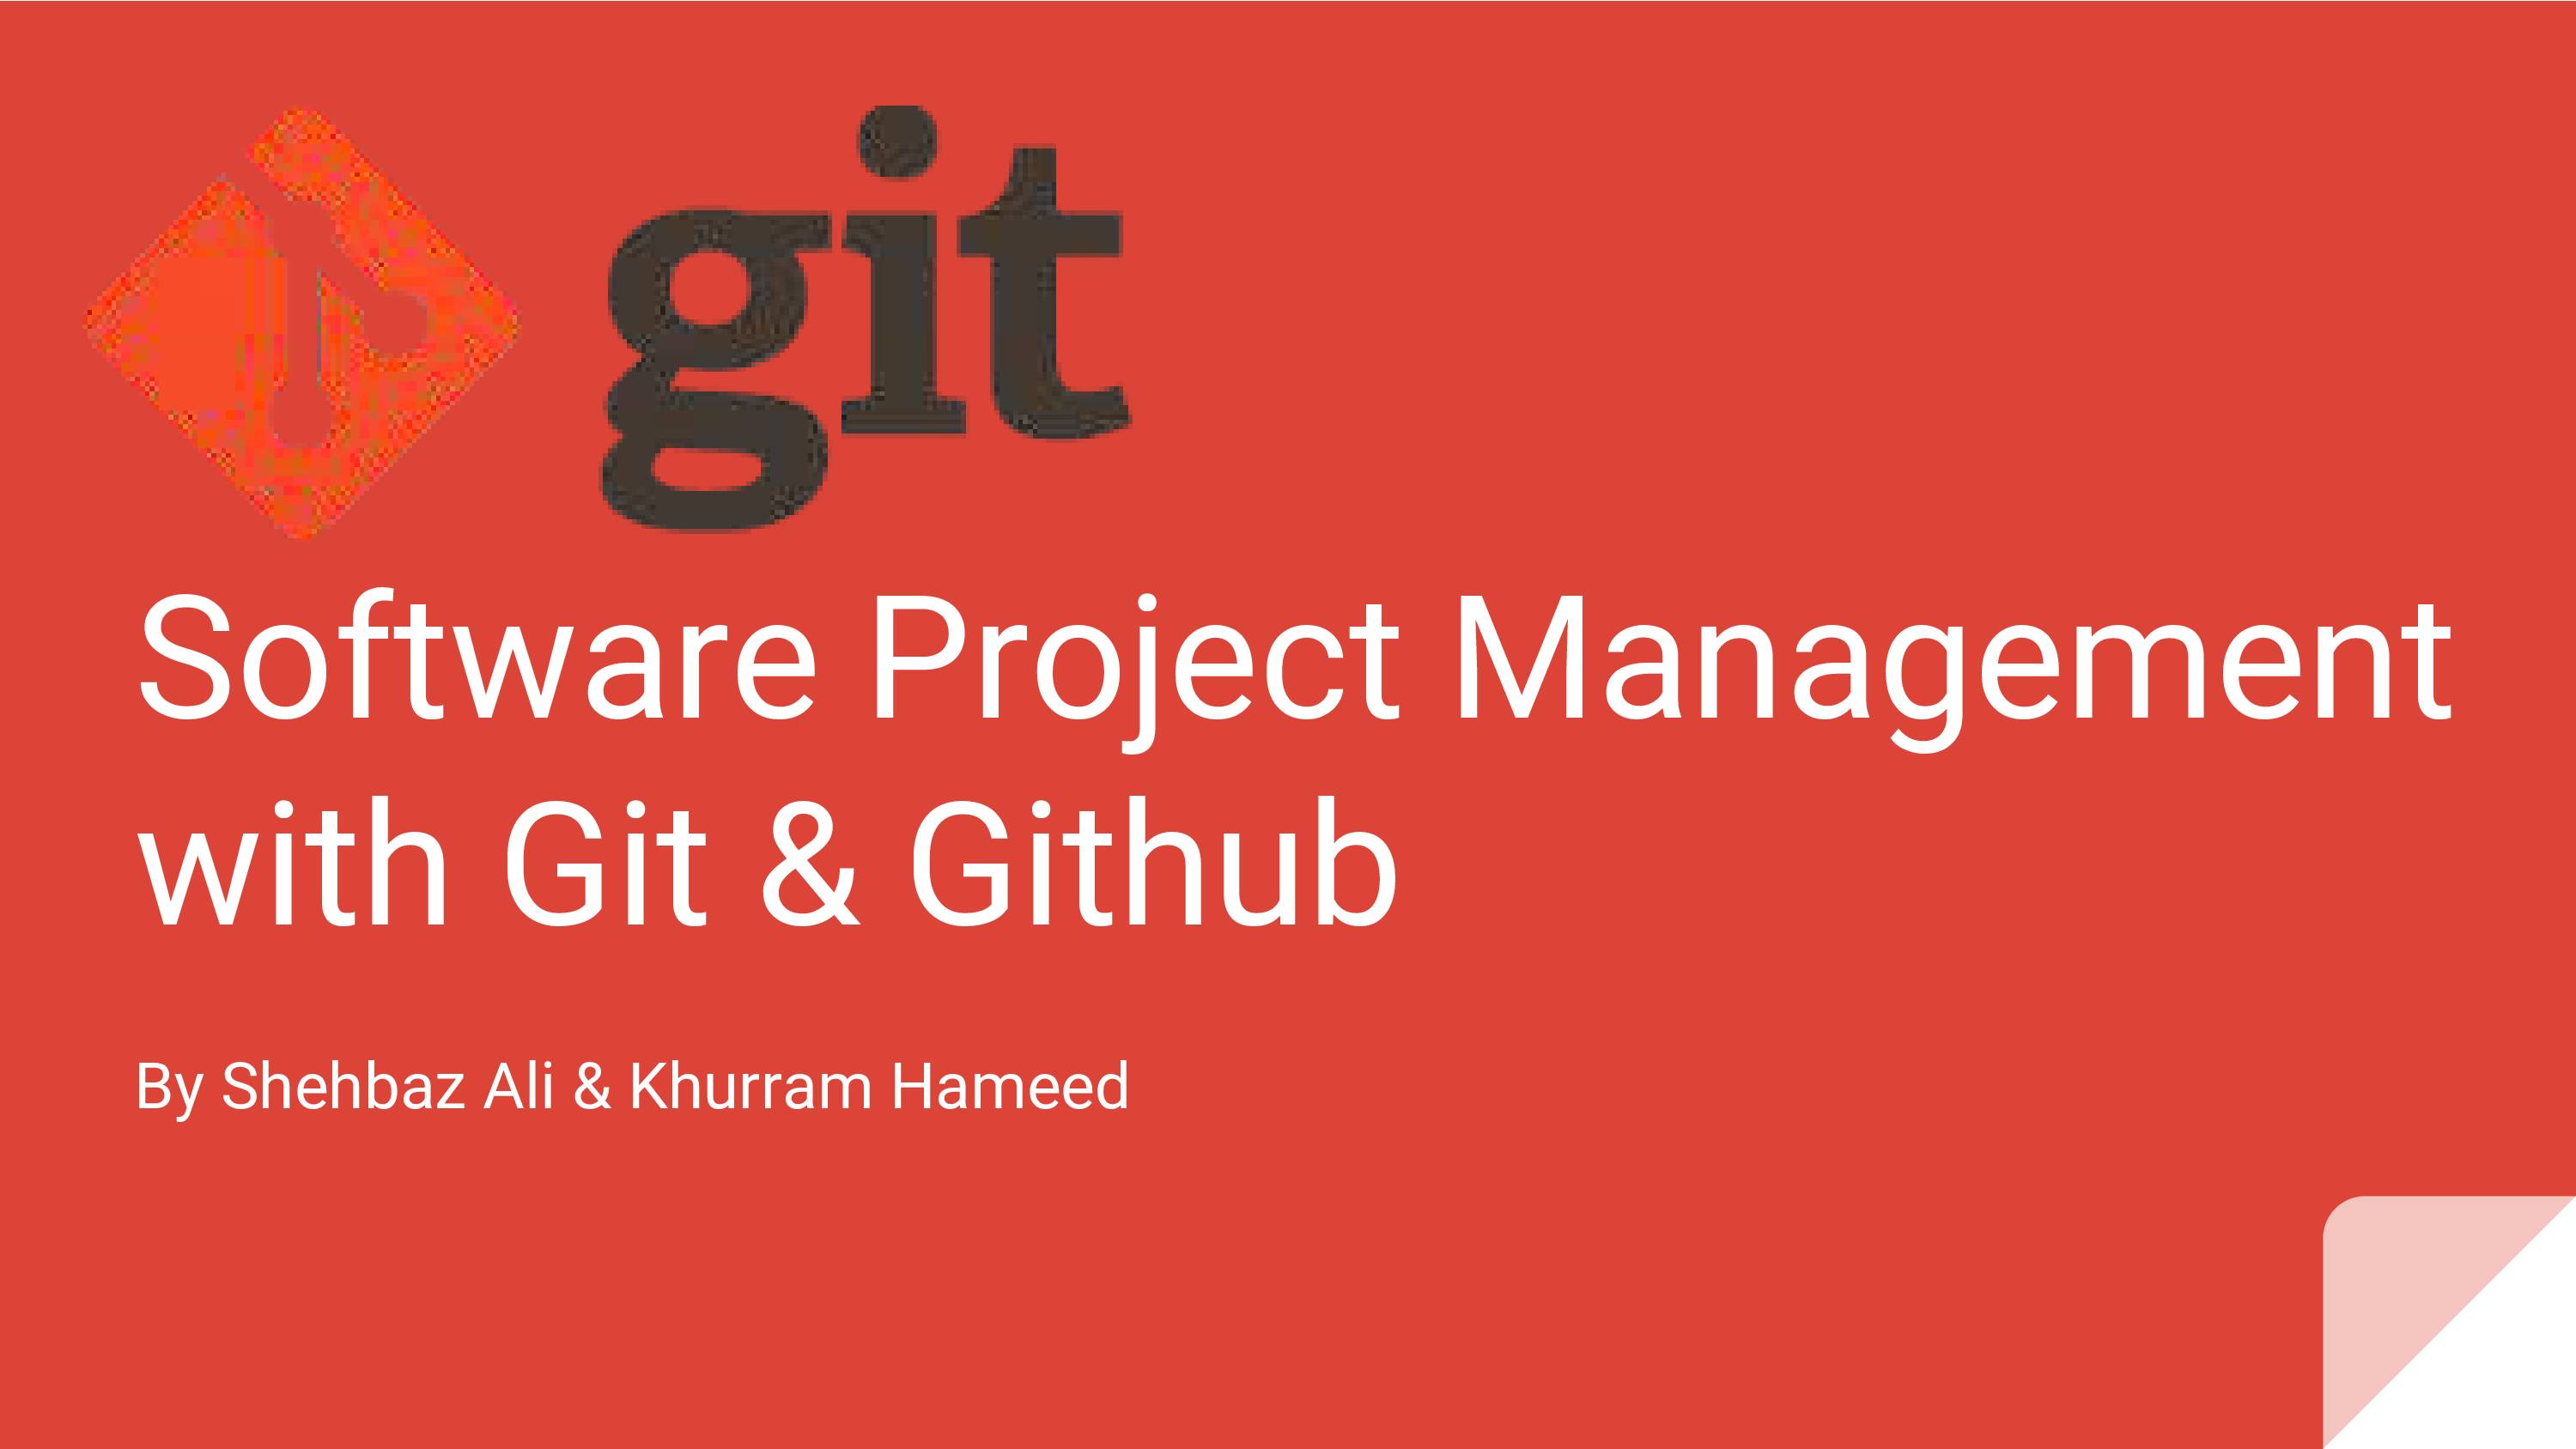 PPT On Software Project Management with Github